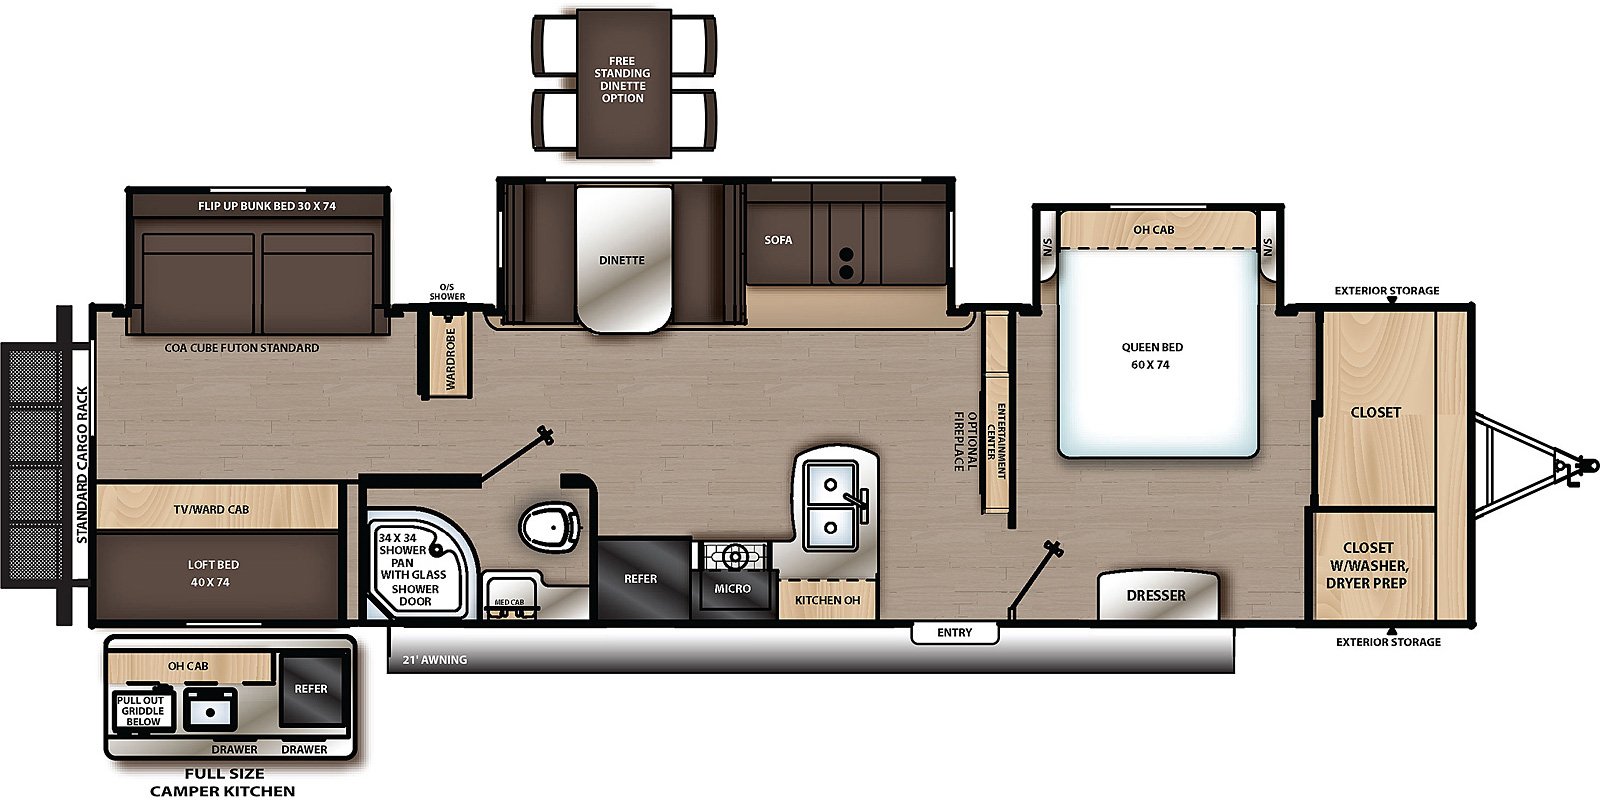 The 343BHTS has three slide outs on the off-door side and one entry door on the door side. Interior layout from front to back: front bedroom with off-door side slide out containing side facing queen bed and overhead cabinet, closet, and dresser; entertainment center; kitchen living dining area with off-door side slide out containing sofa and dinette; door side kitchen containing double basin sink, overhead cabinet, cook top stove, microwave cabinet, and refrigerator; door side bathroom; and rear bedroom with door side lofted bed, wardrobe, and off-door side slide out containing sofa and upper bunk.